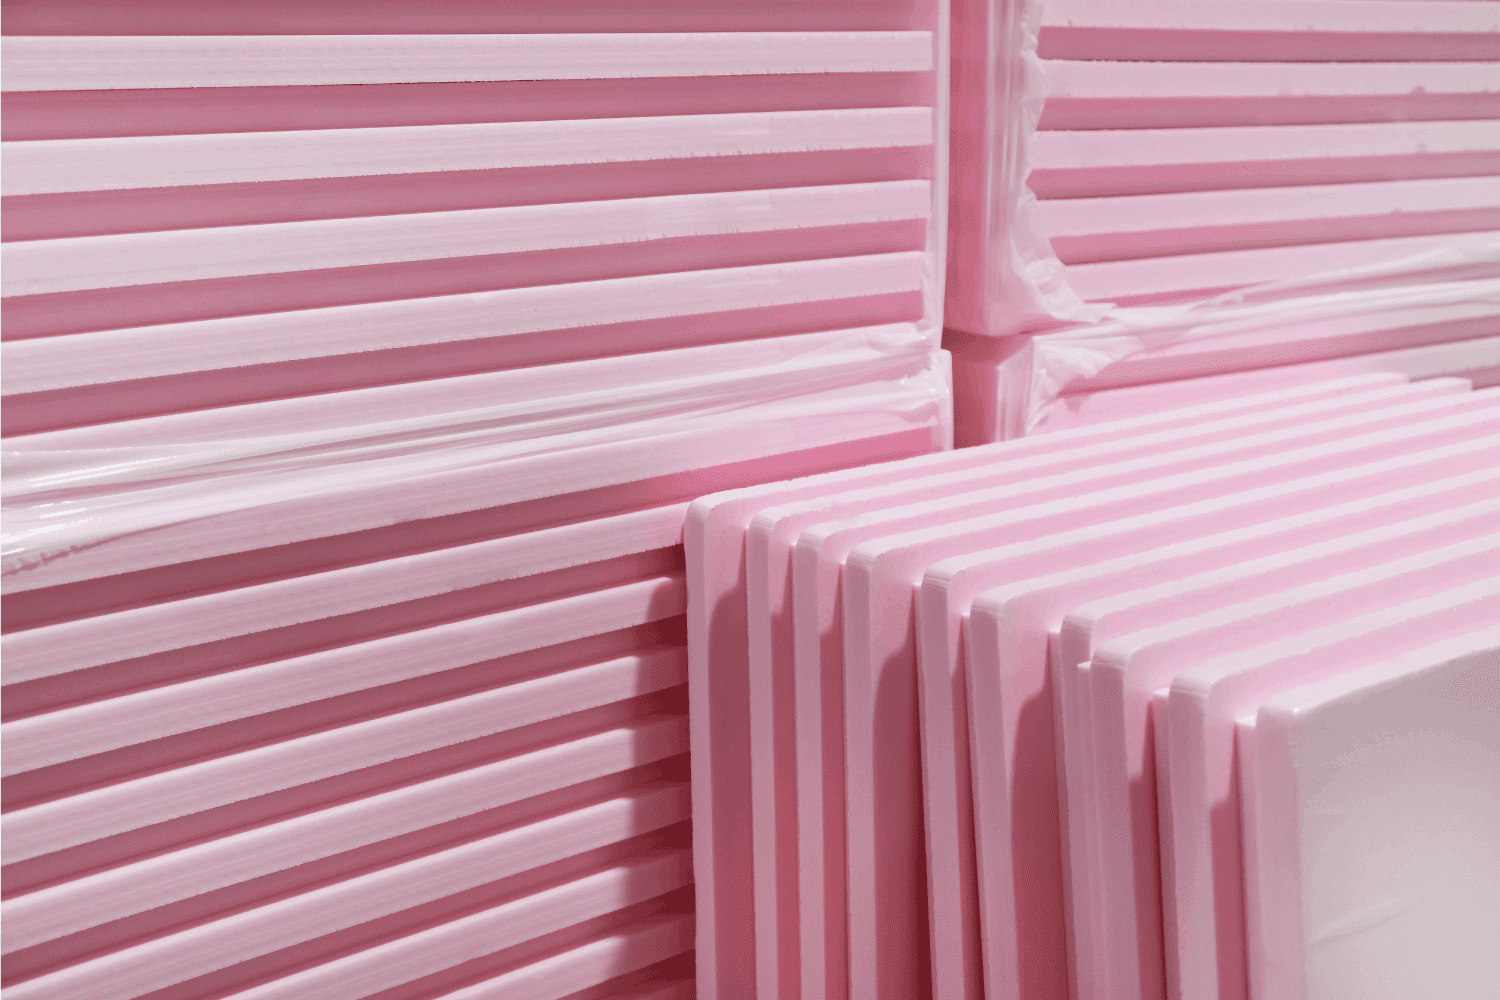 Pink Extruded Polystyrene XPS foam thermal insulation boards stacked in construction site.